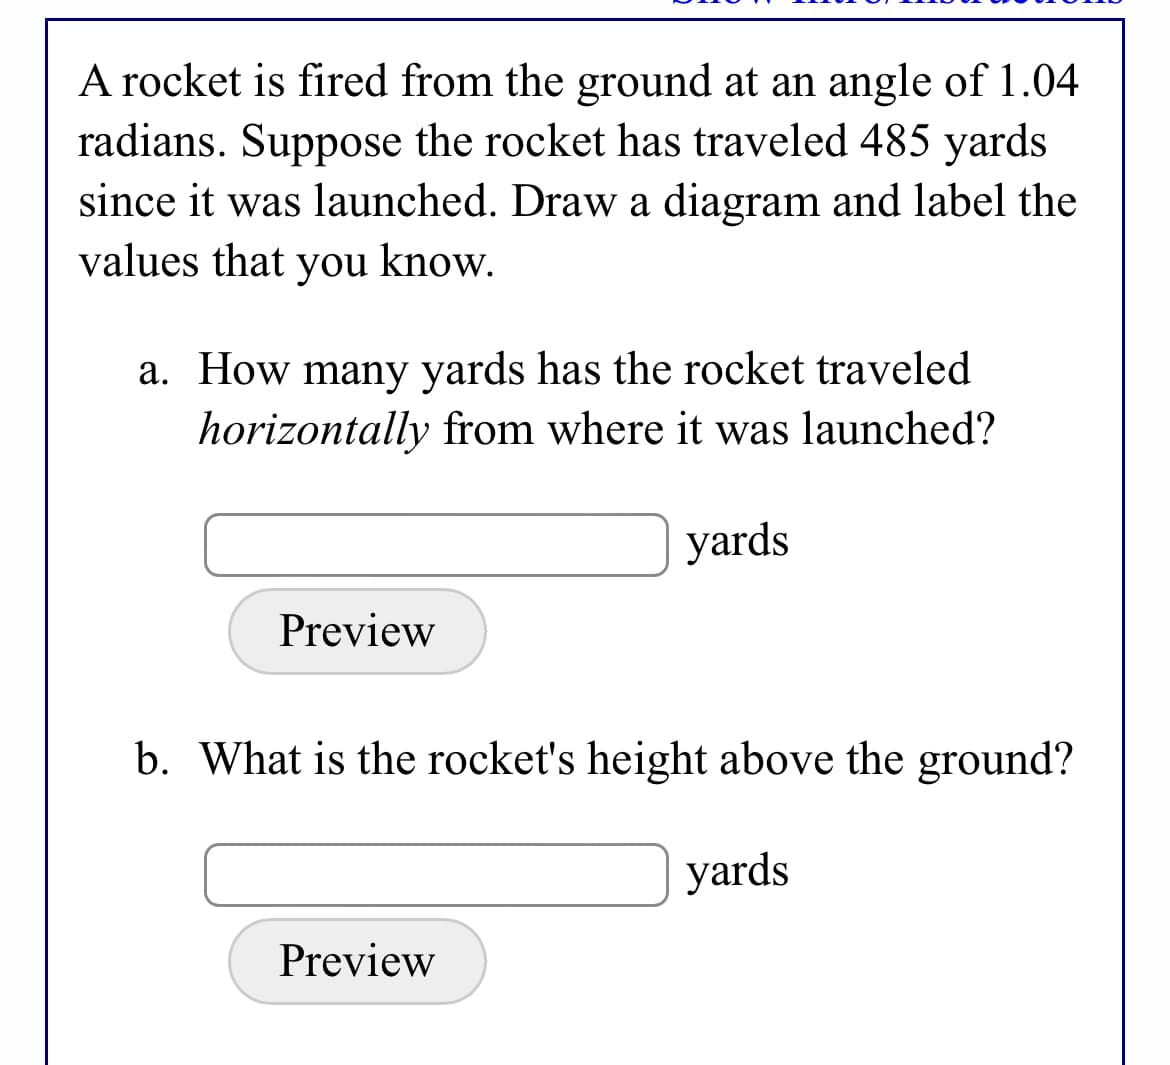 A rocket is fired from the ground at an angle of 1.04
radians. Suppose the rocket has traveled 485 yards
since it was launched. Draw a diagram and label the
values that you know.
a. How many yards has the rocket traveled
horizontally from where it was launched?
yards
Preview
b. What is the rocket's height above the ground?
yards
Preview
